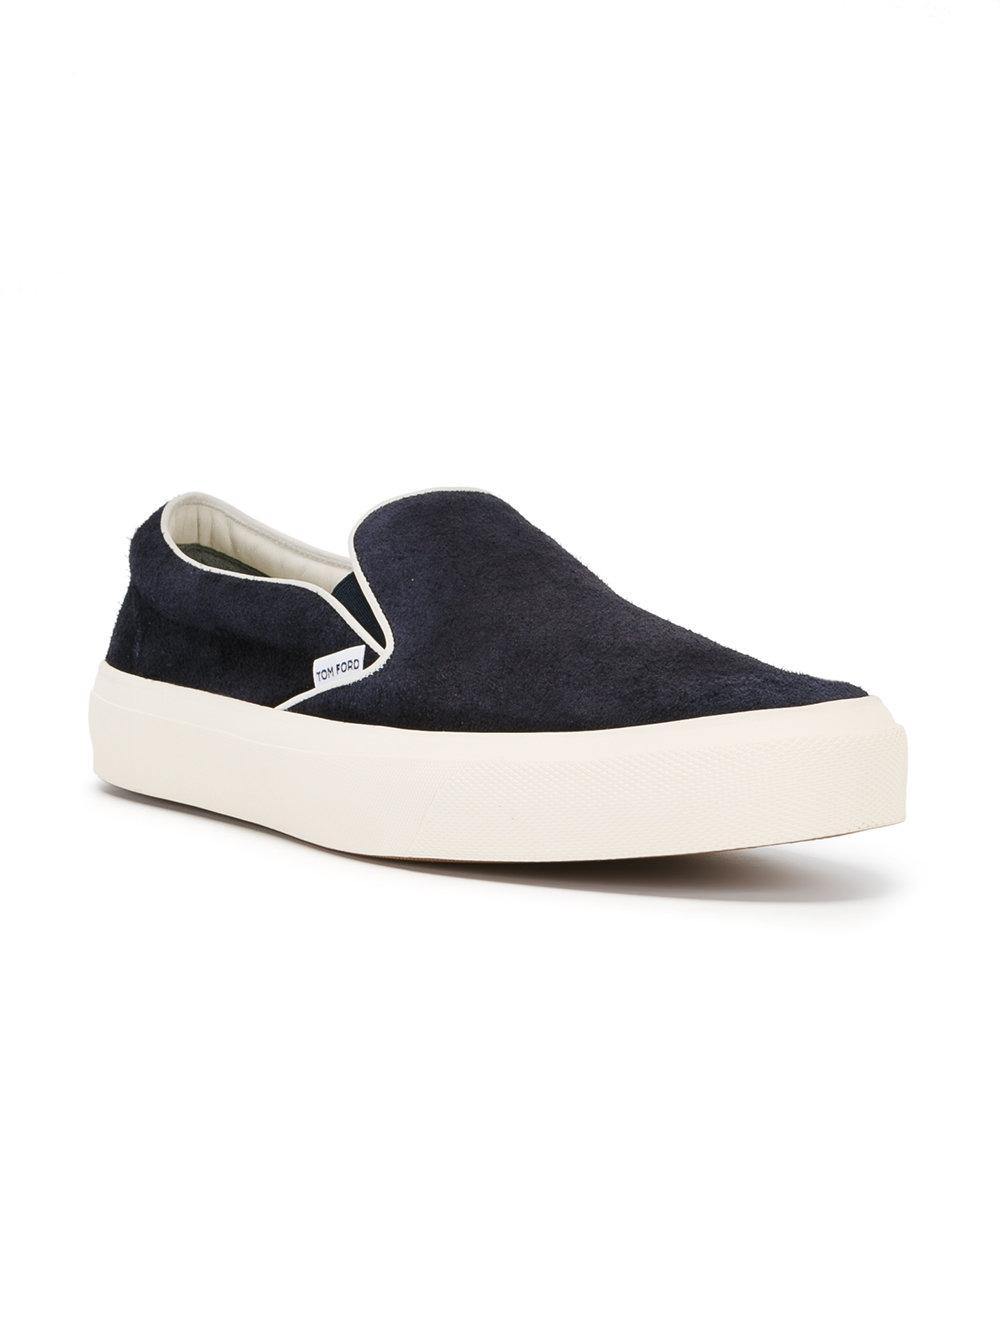 Tom ford Cambridge Sneakers in Blue for Men | Lyst